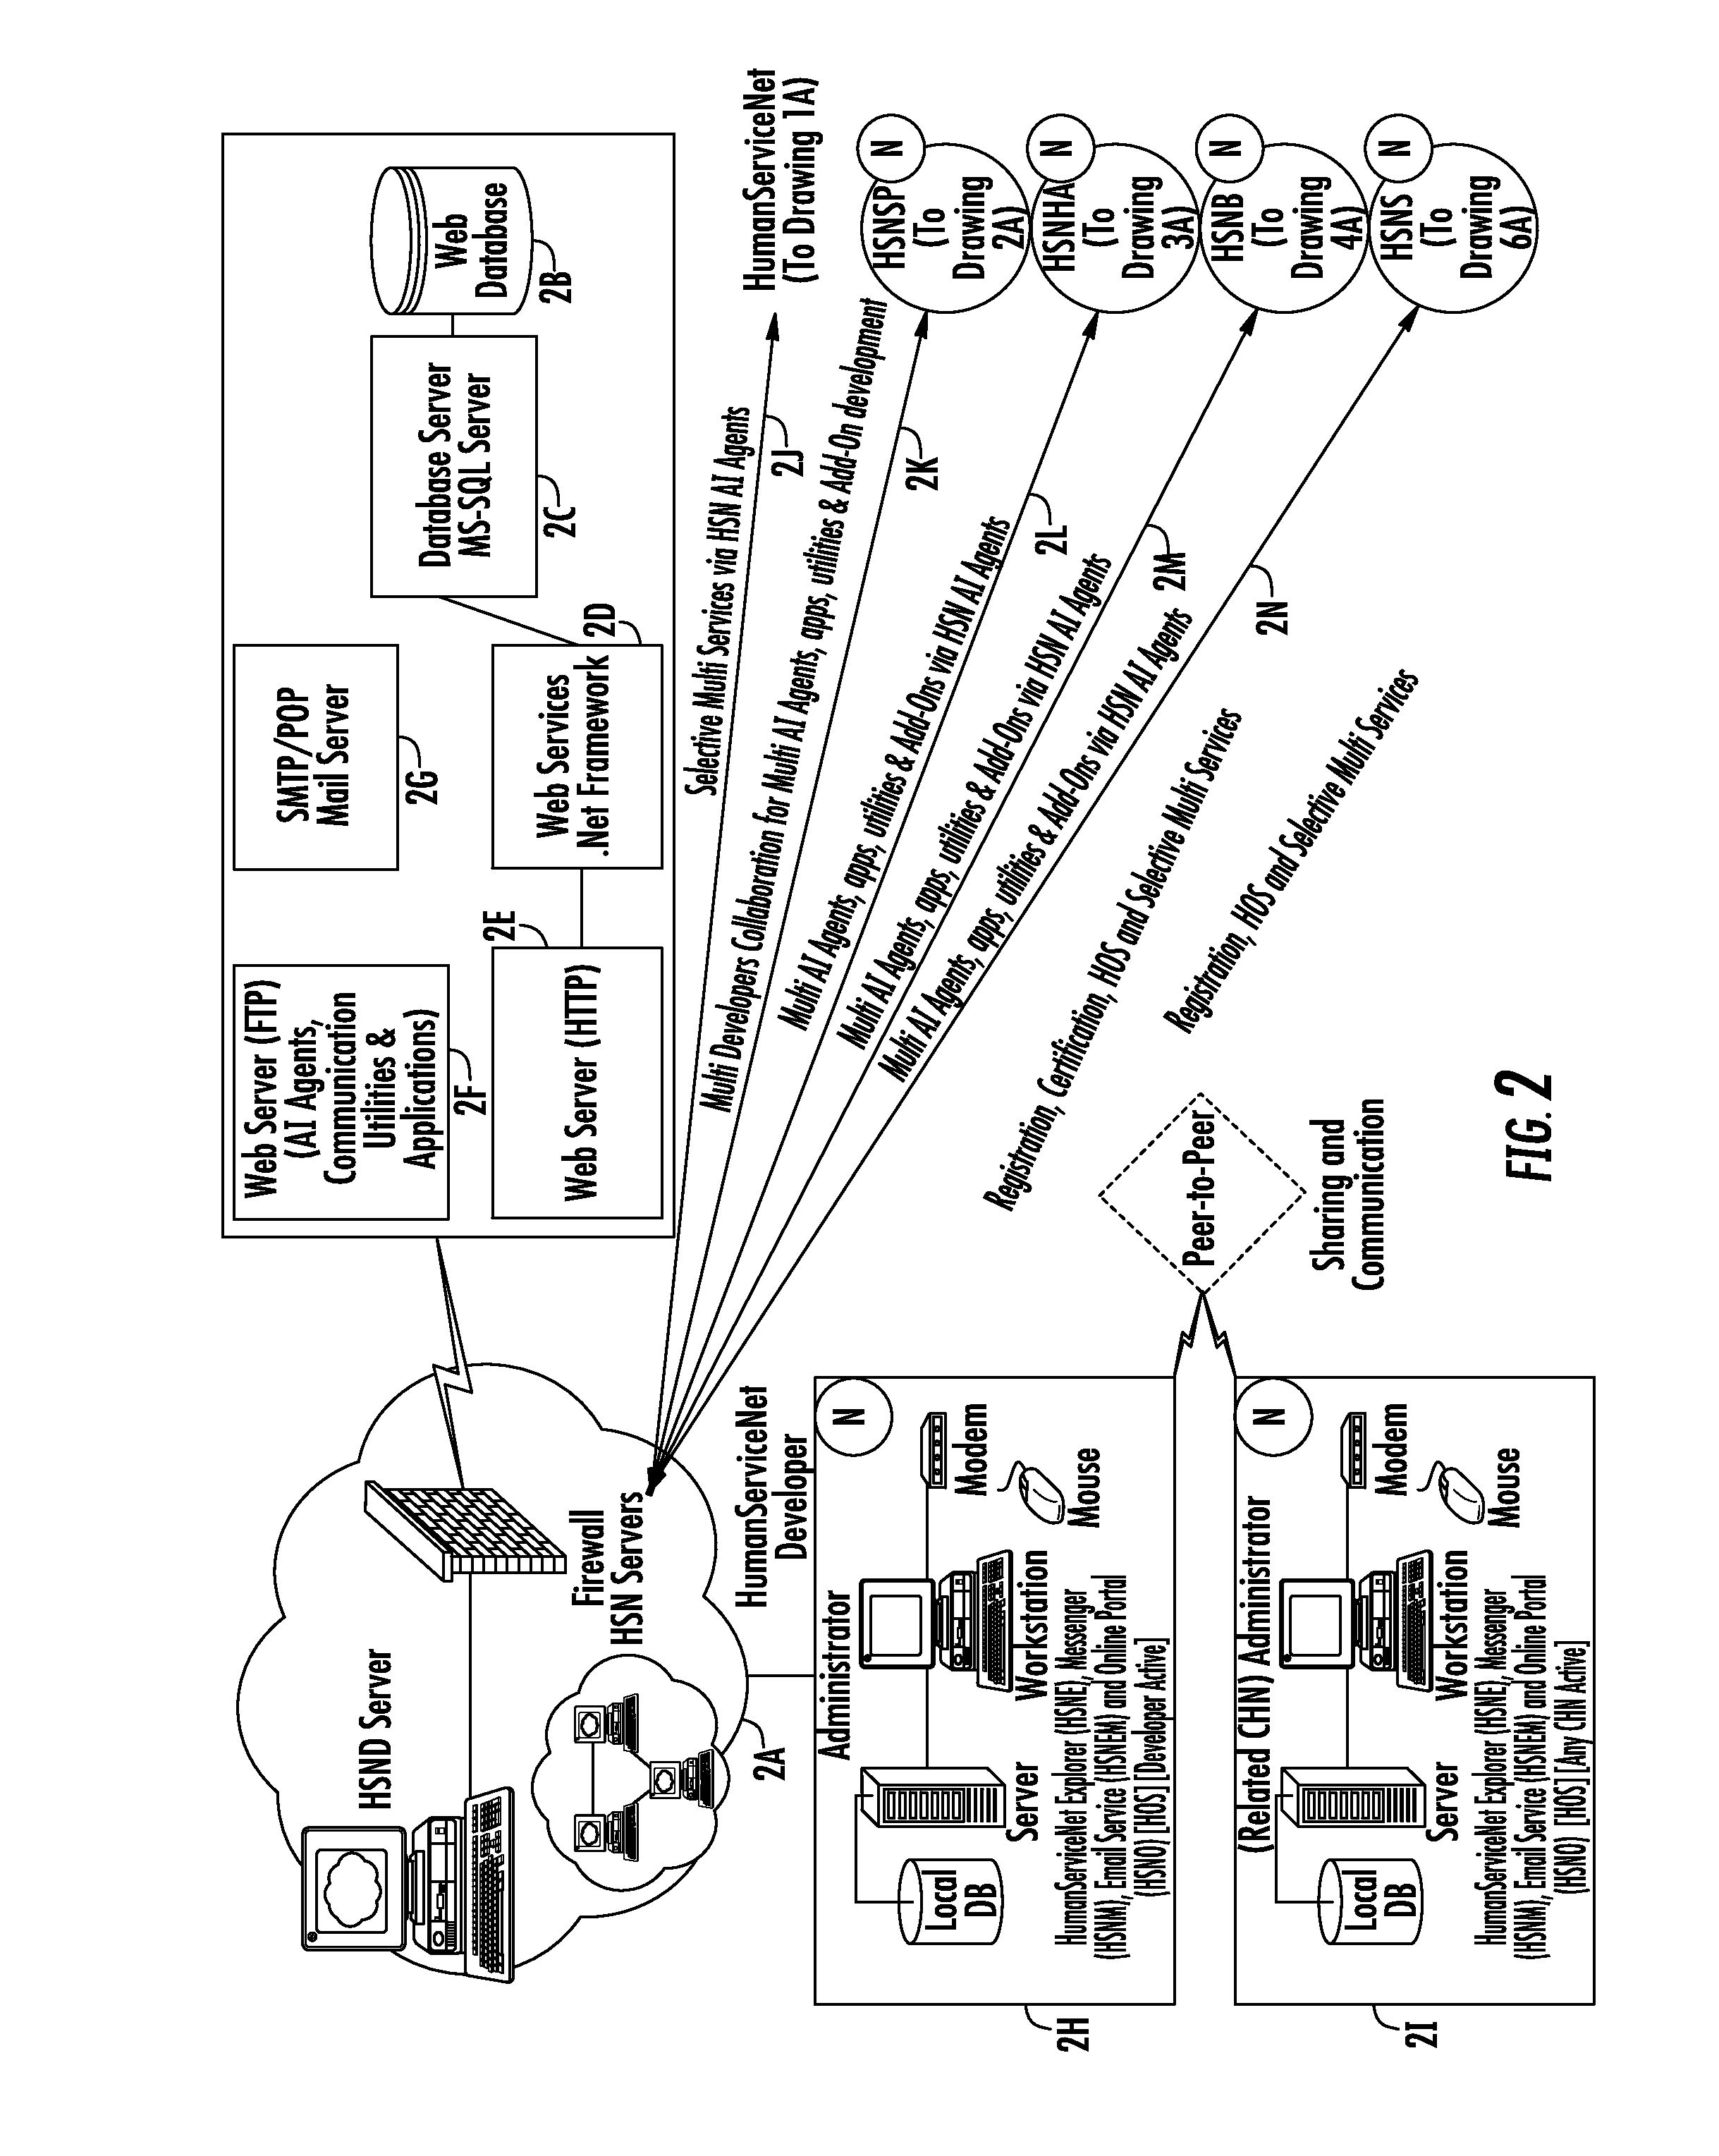 System and method for accessing applications for social networking and communication in plurality of networks